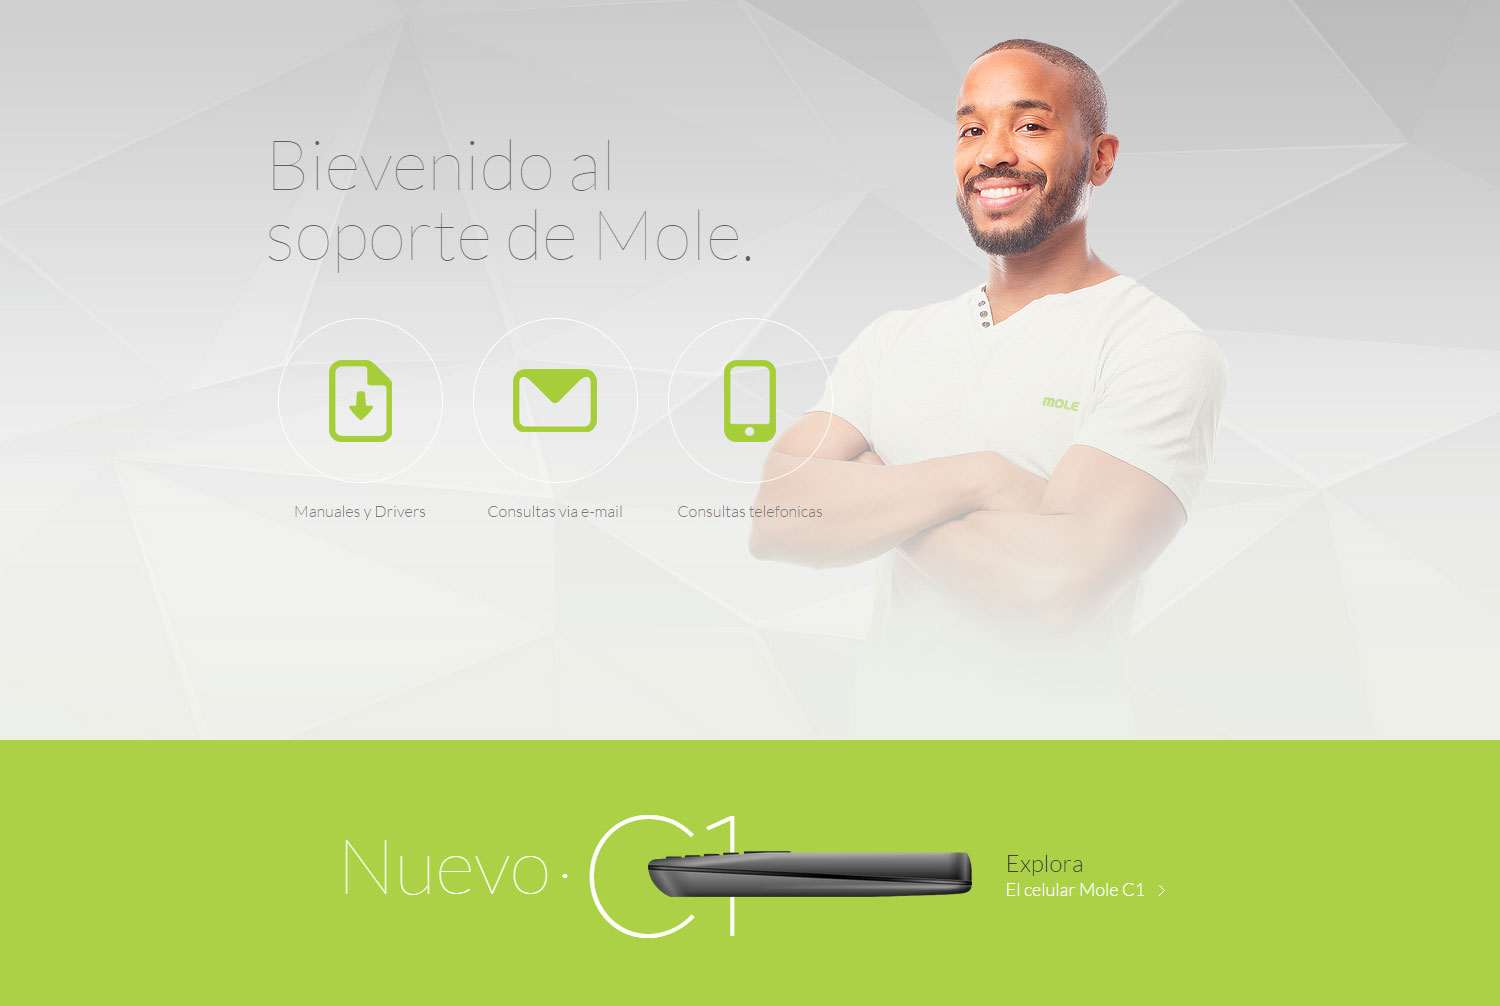 MOLE products - Website of the Day